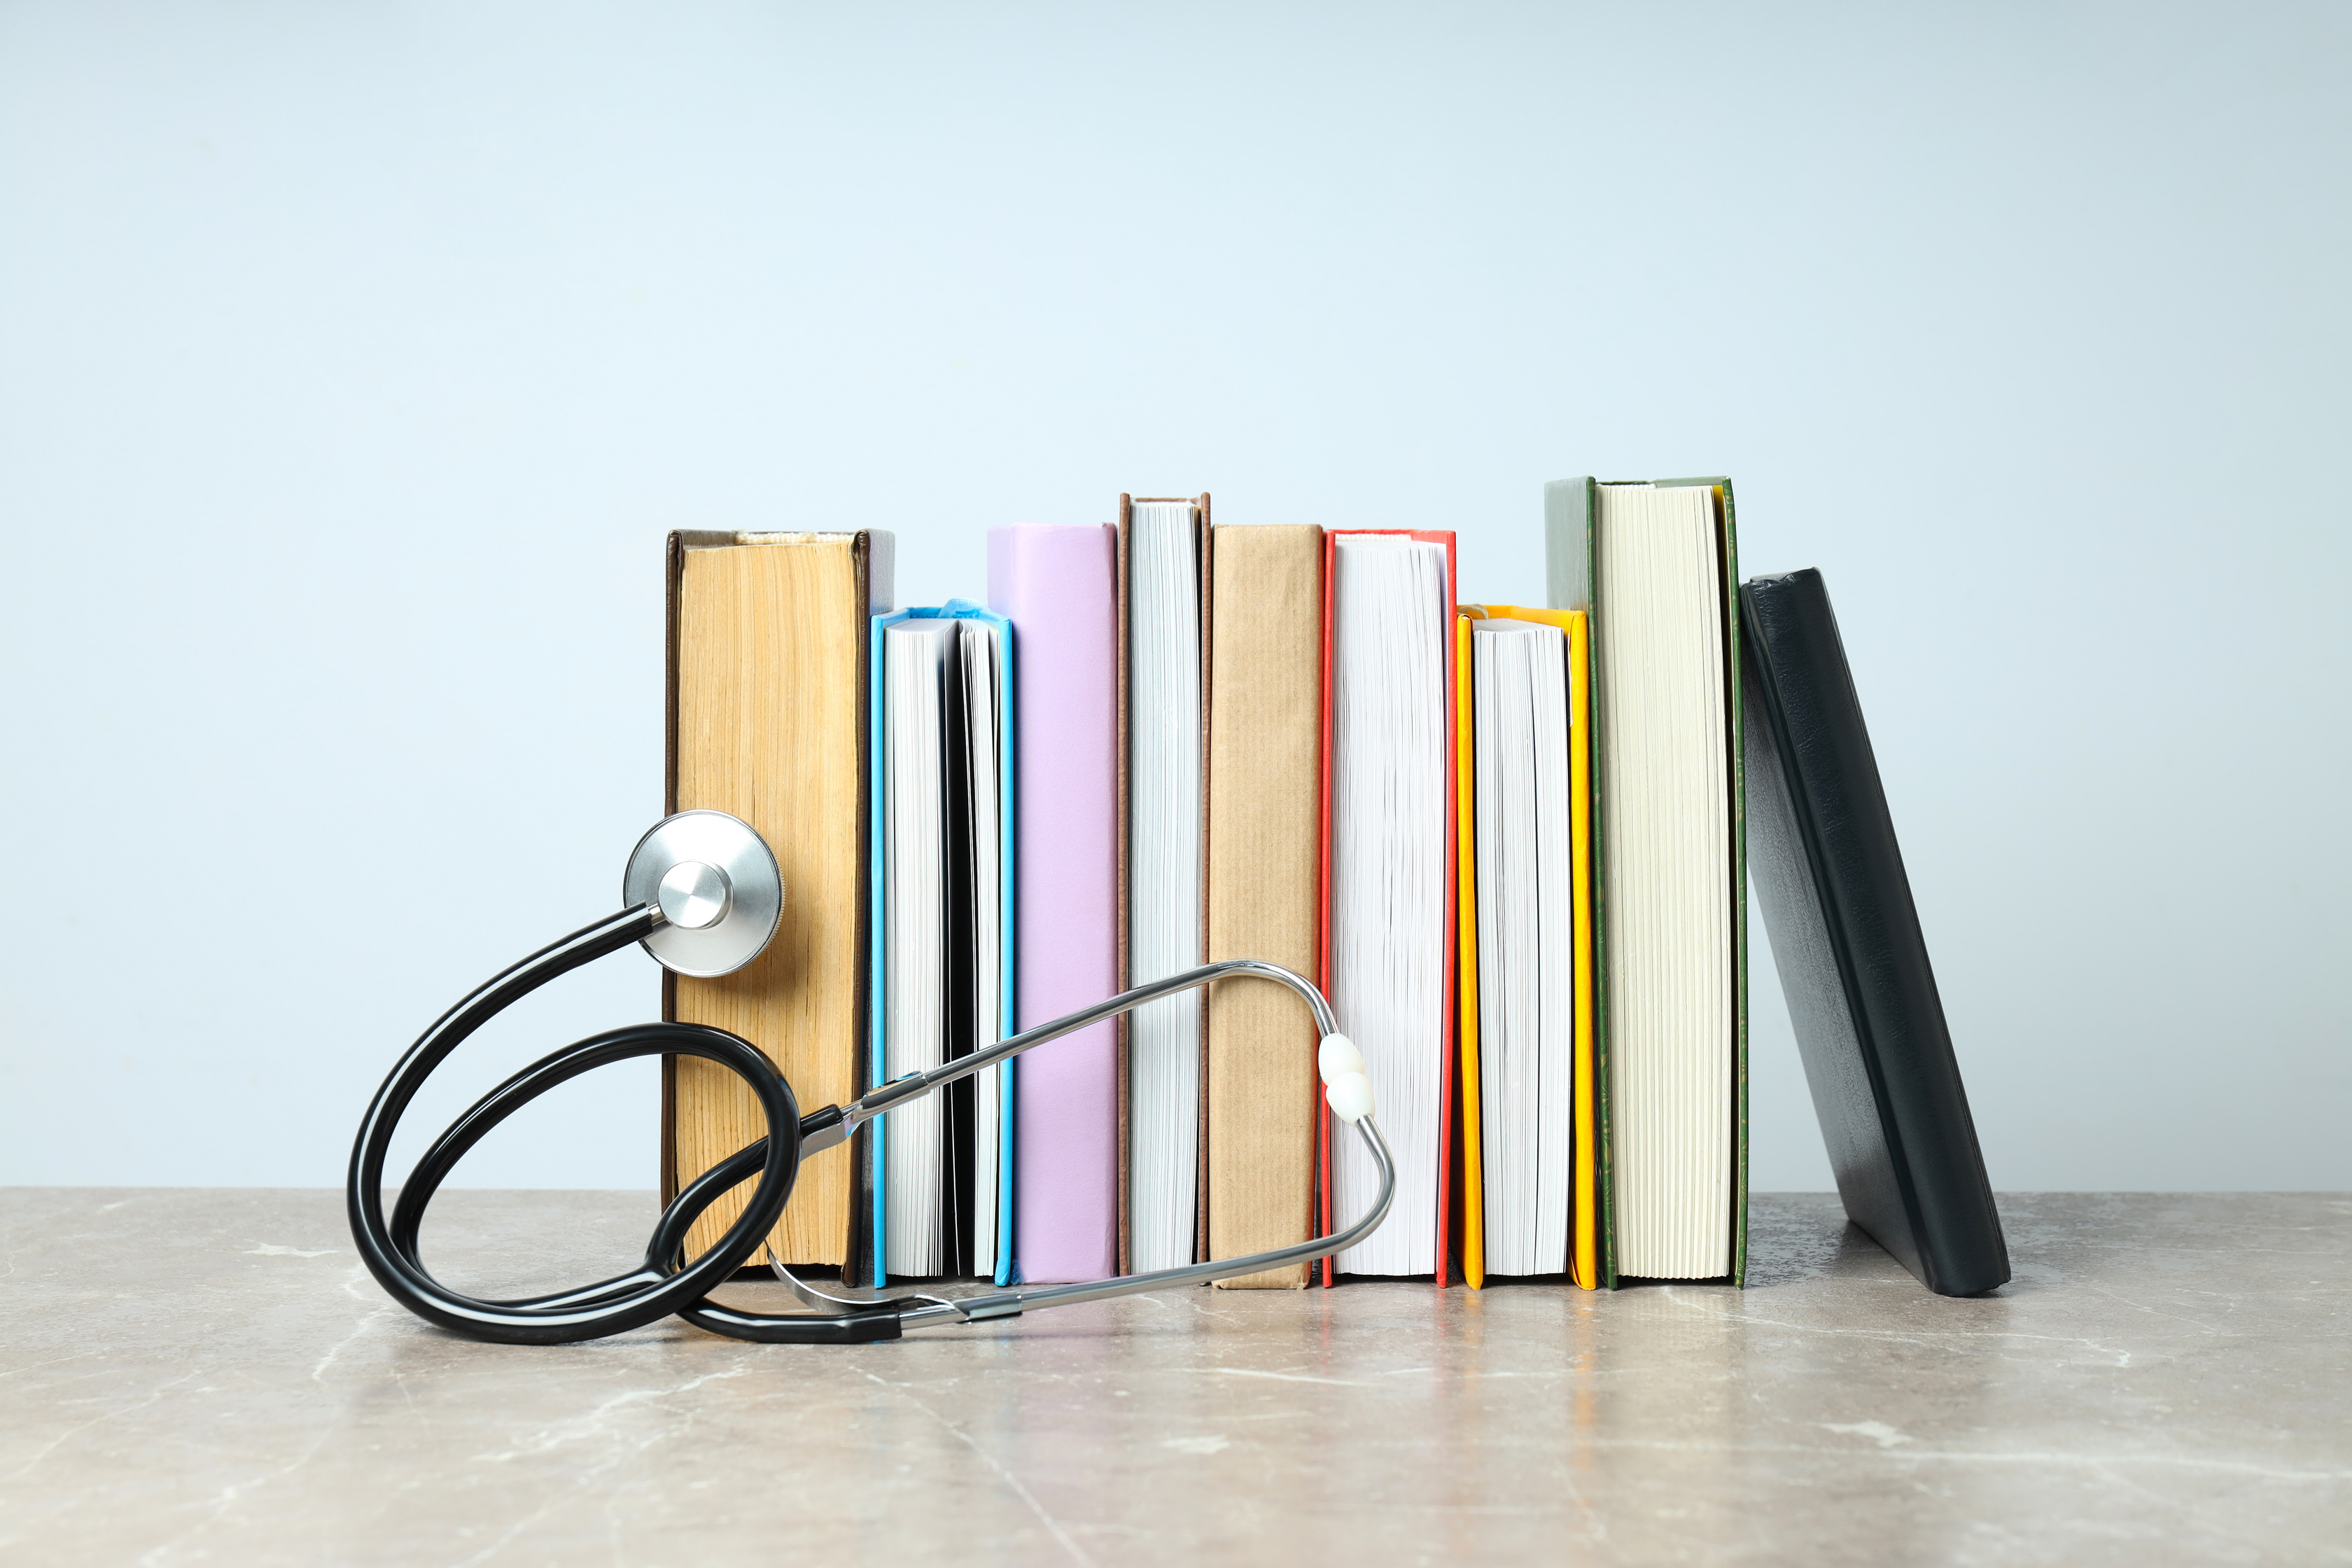 Concept of medical education and medical books